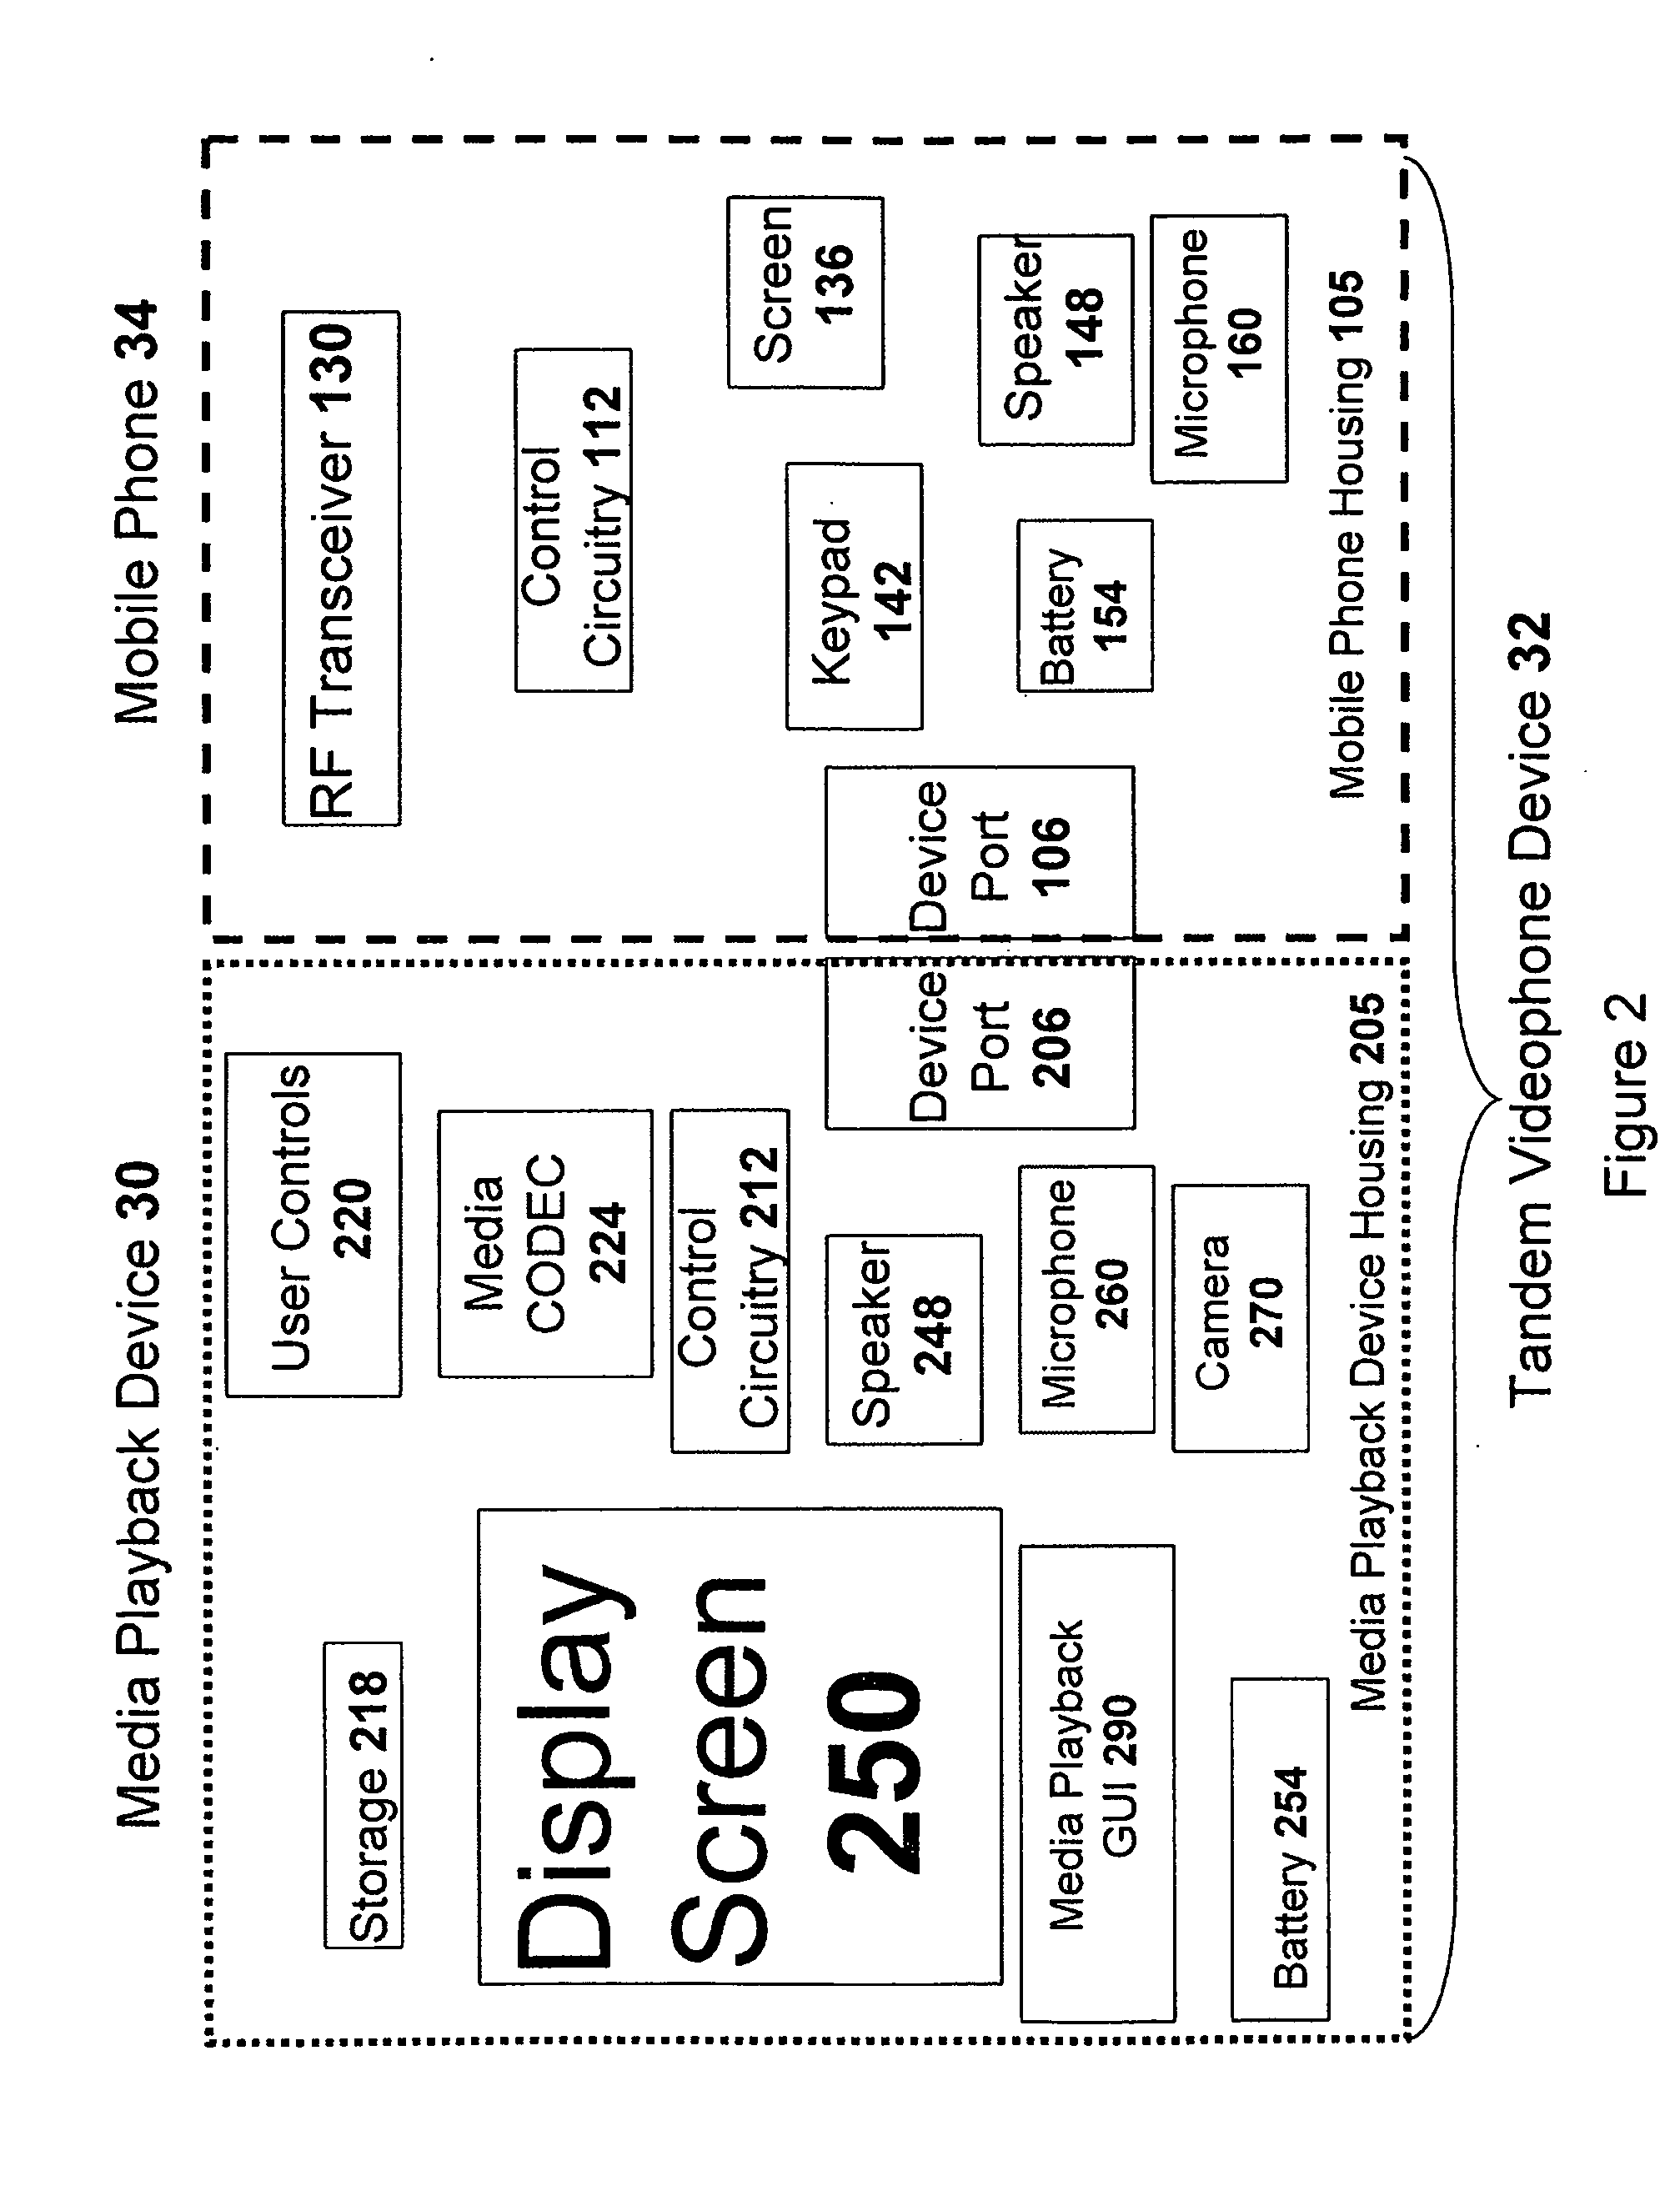 Methods of operating a synergetic tandem pocket device